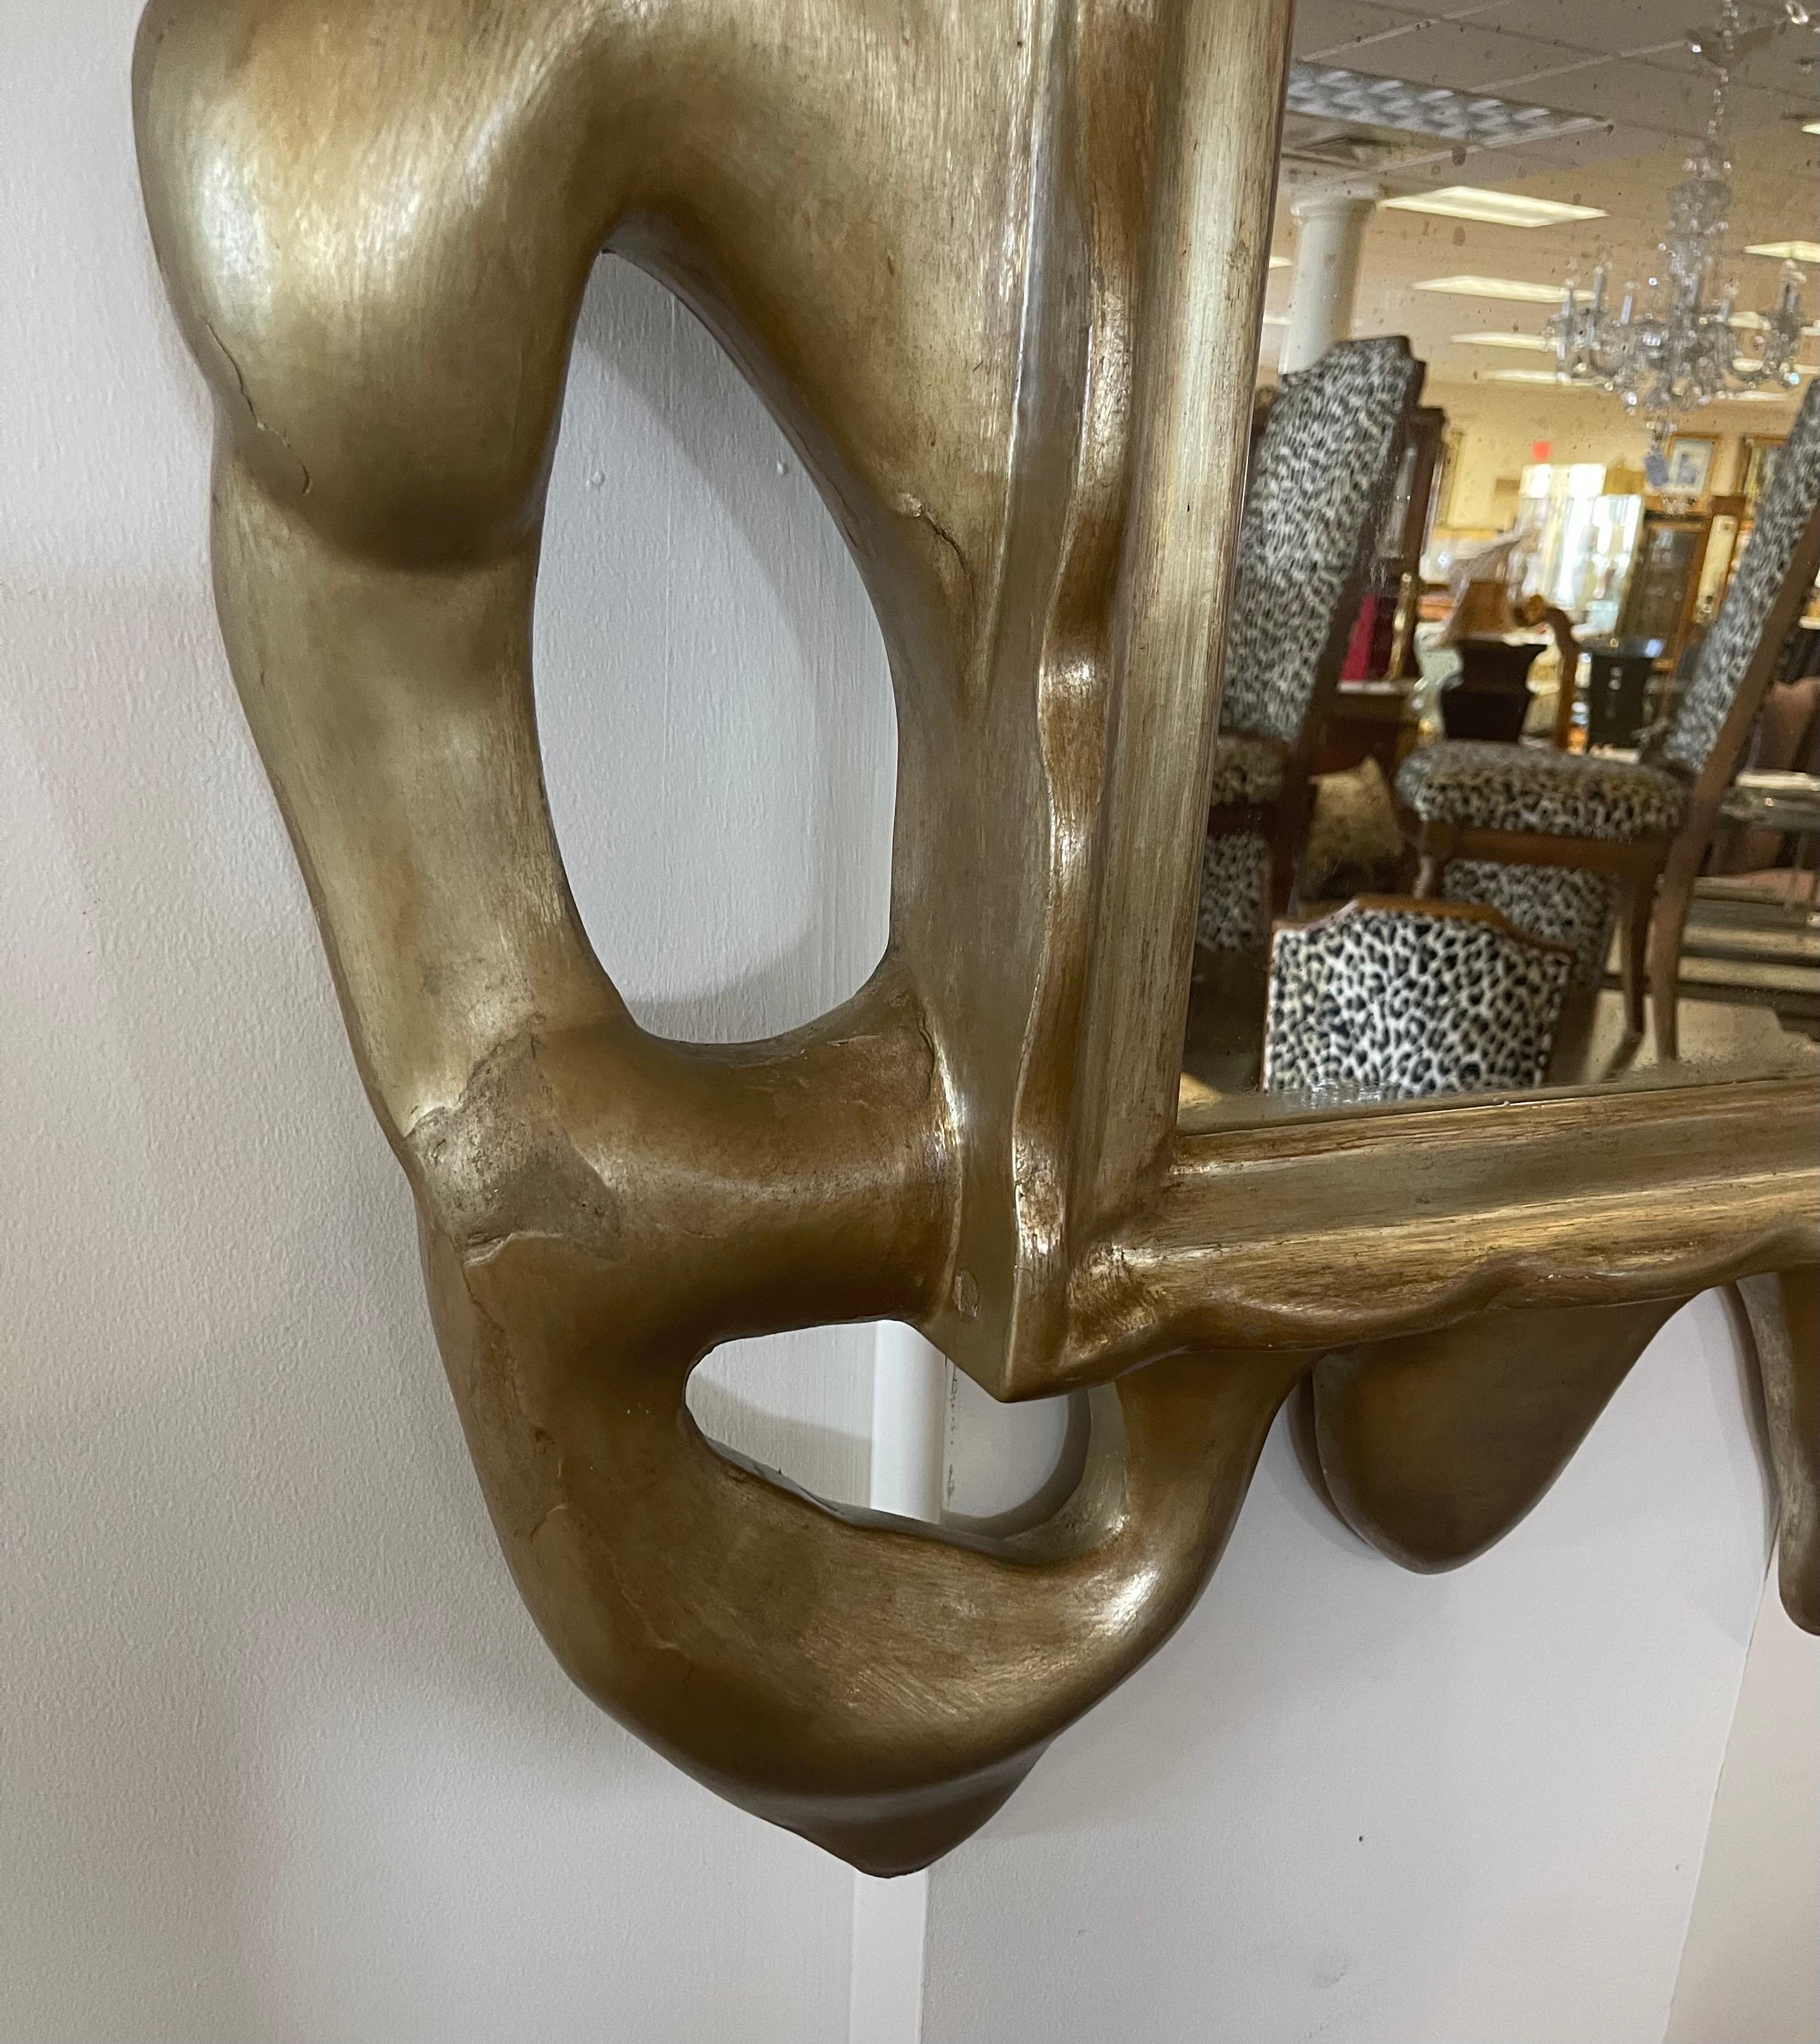 A Donghia hand carved wood frame with freeform, organic lines. With a muted lighter gold finish on the frame and antiqued patina on the mirror itself, this luxe piece hints at traditional styles but feels fresh and modern. There is some age